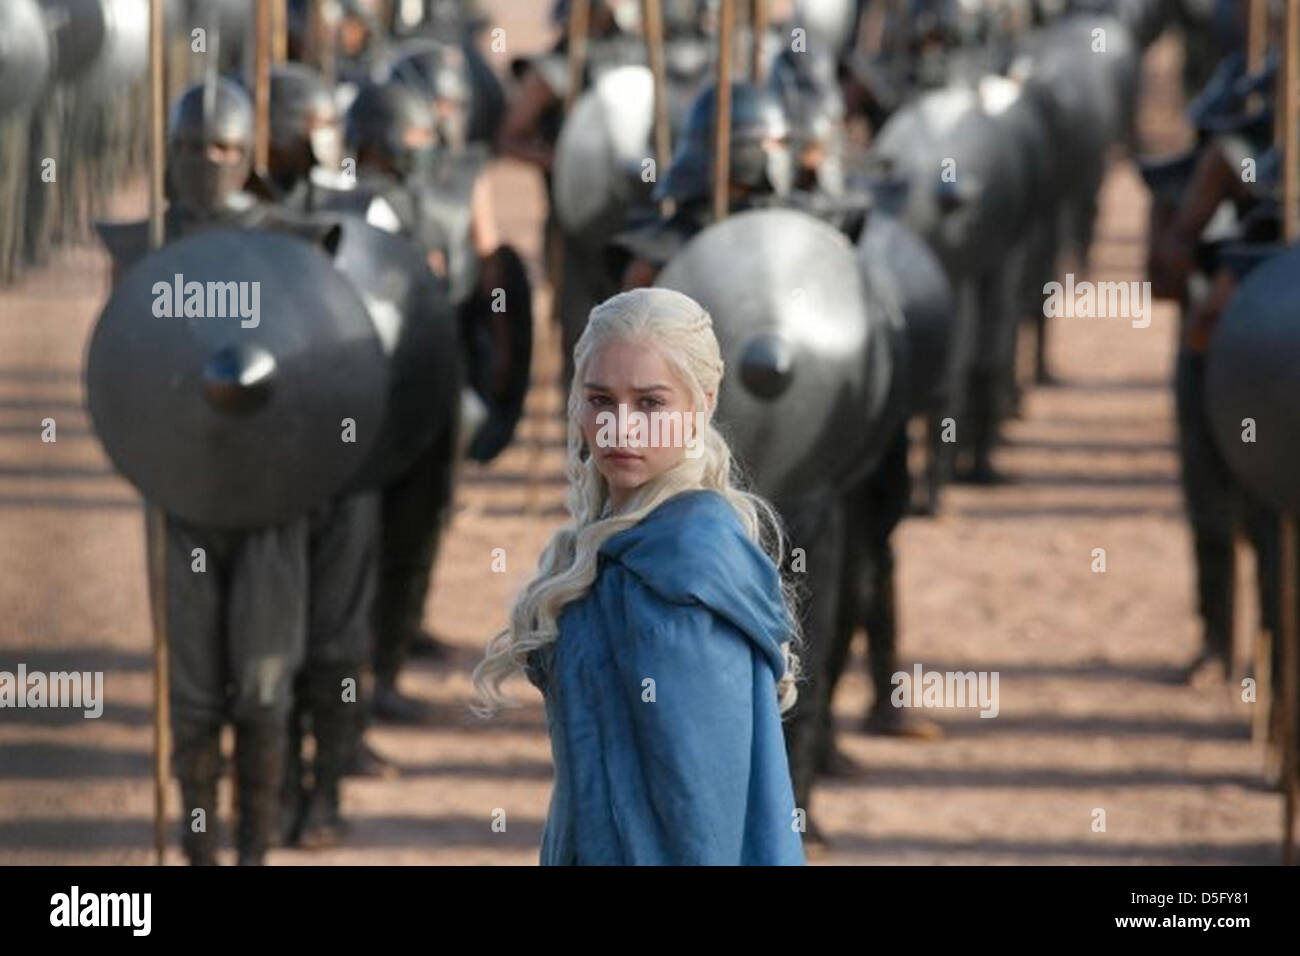 GAME OF THRONES  2011  HBO TV series with Emilia Clarke Stock Photo